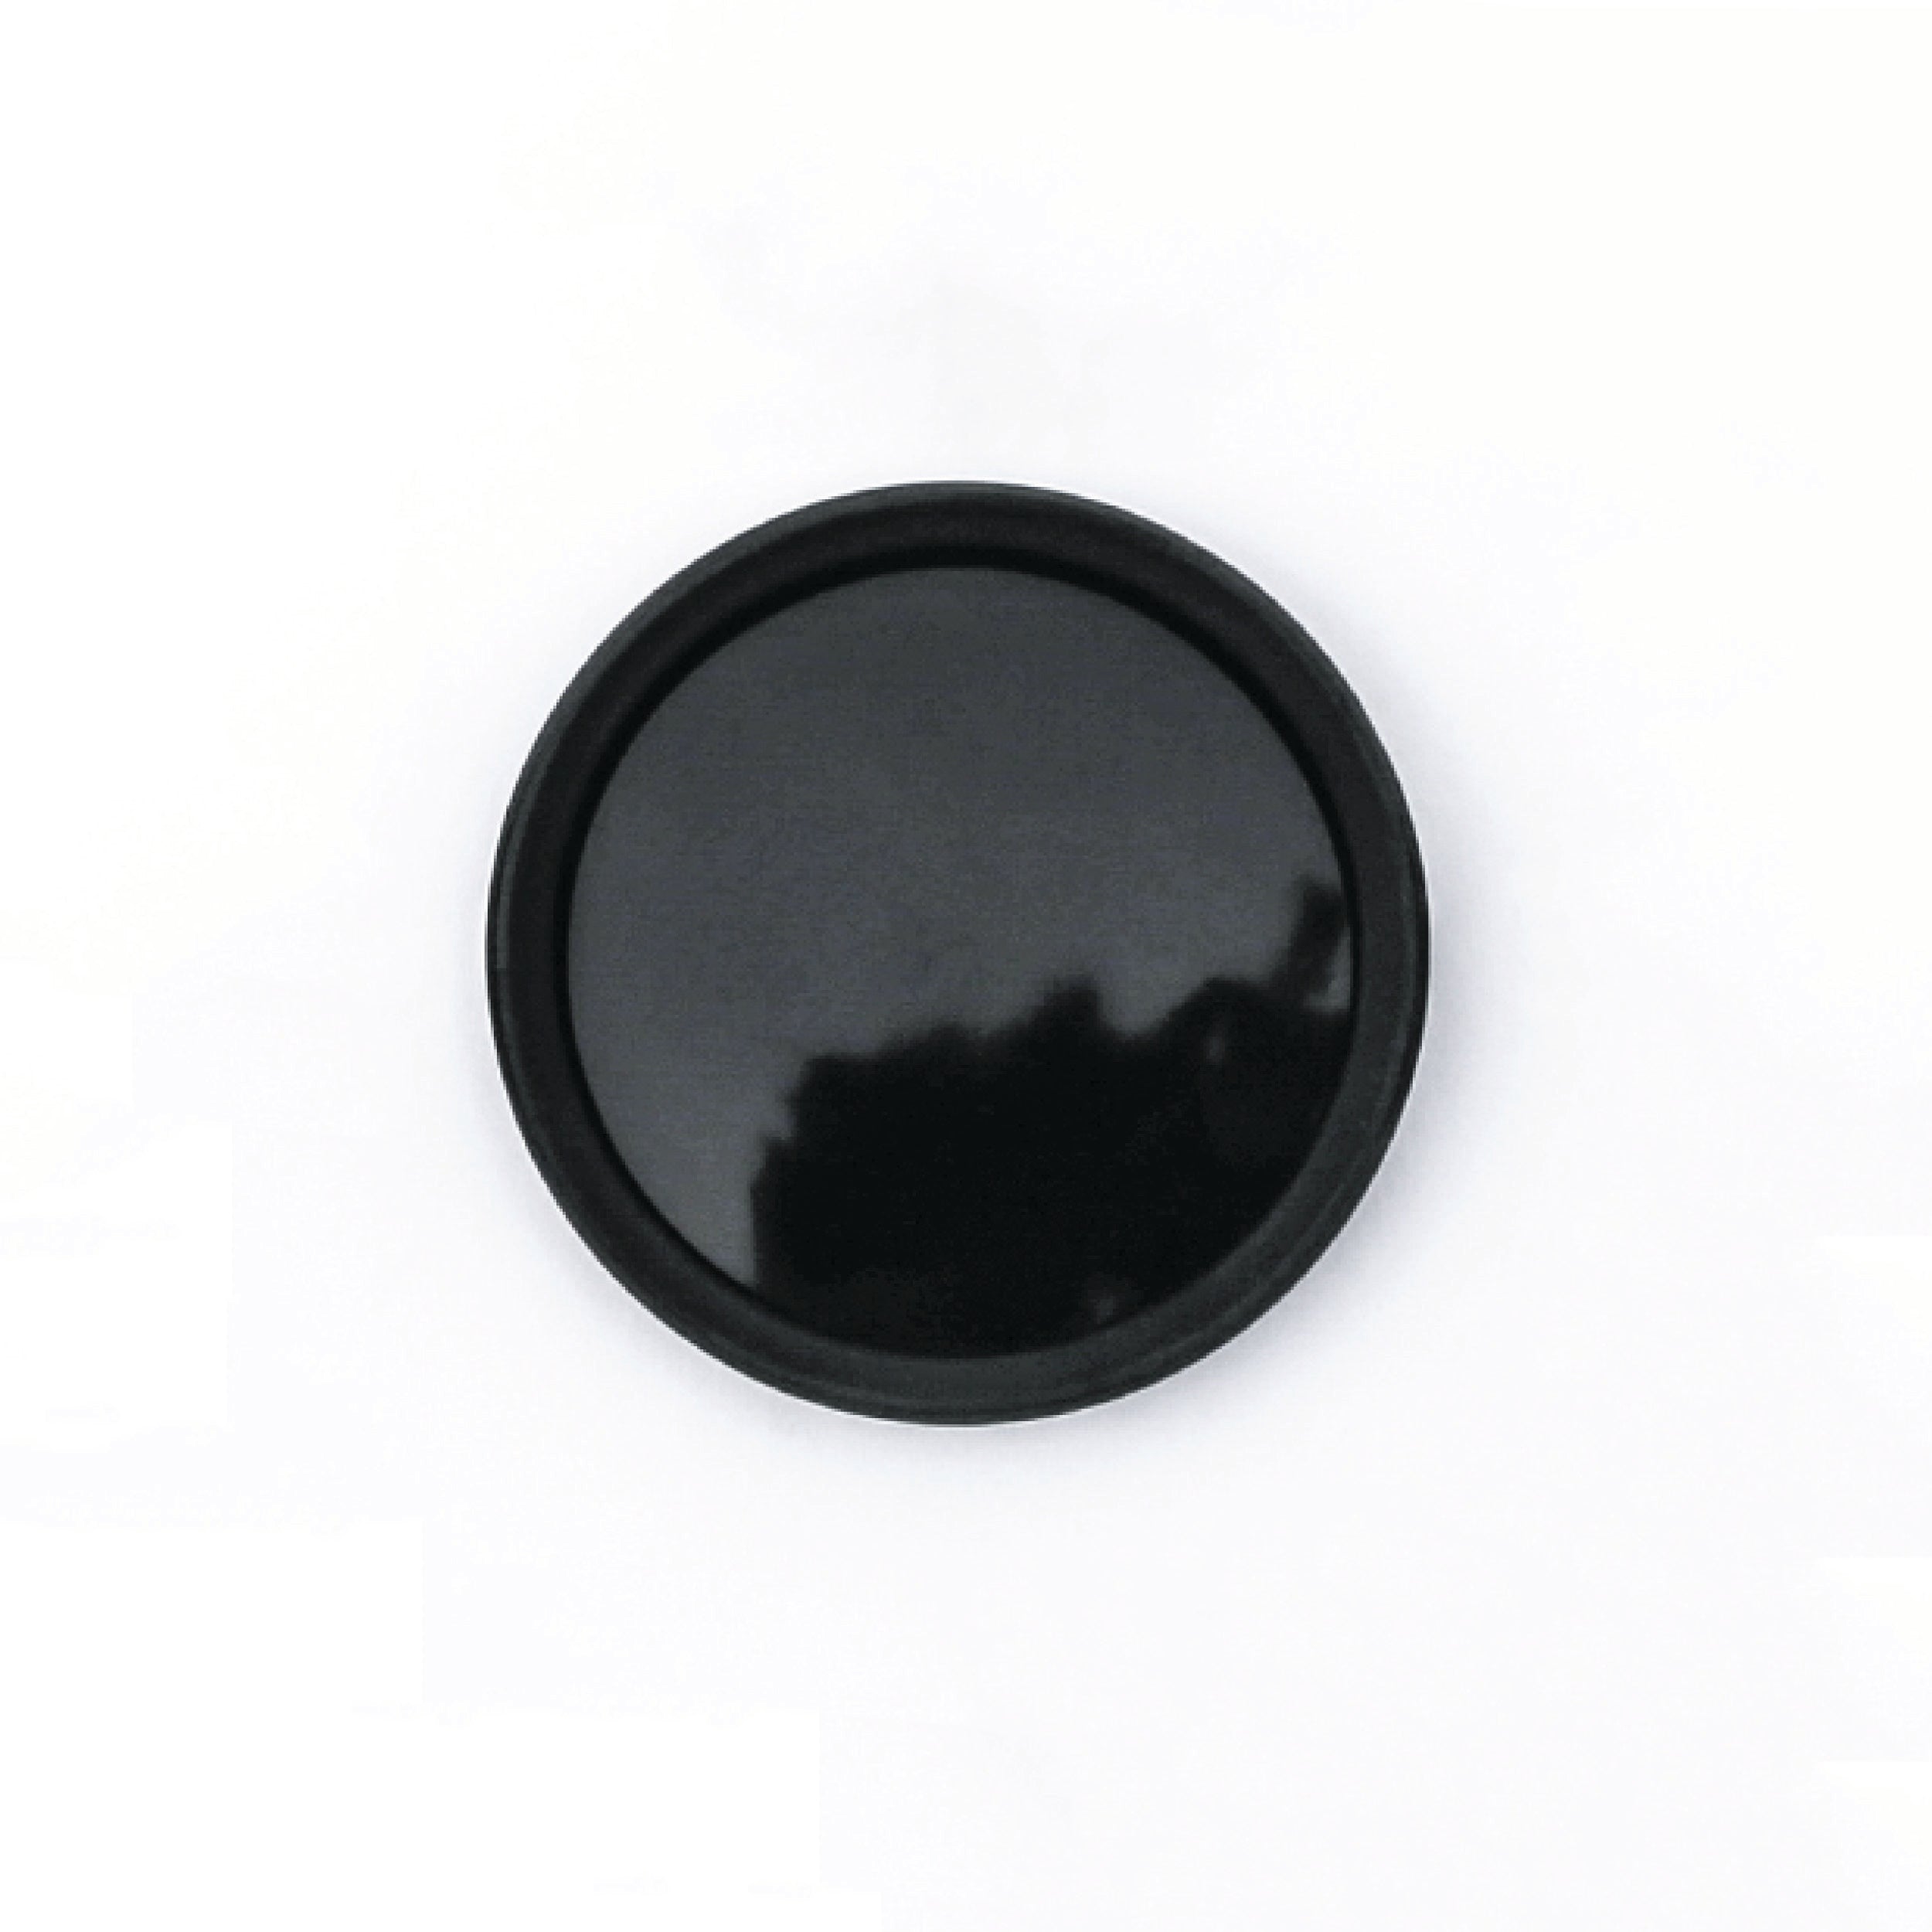 LIDS BLACK (SILICONE) FOR WECK (M)